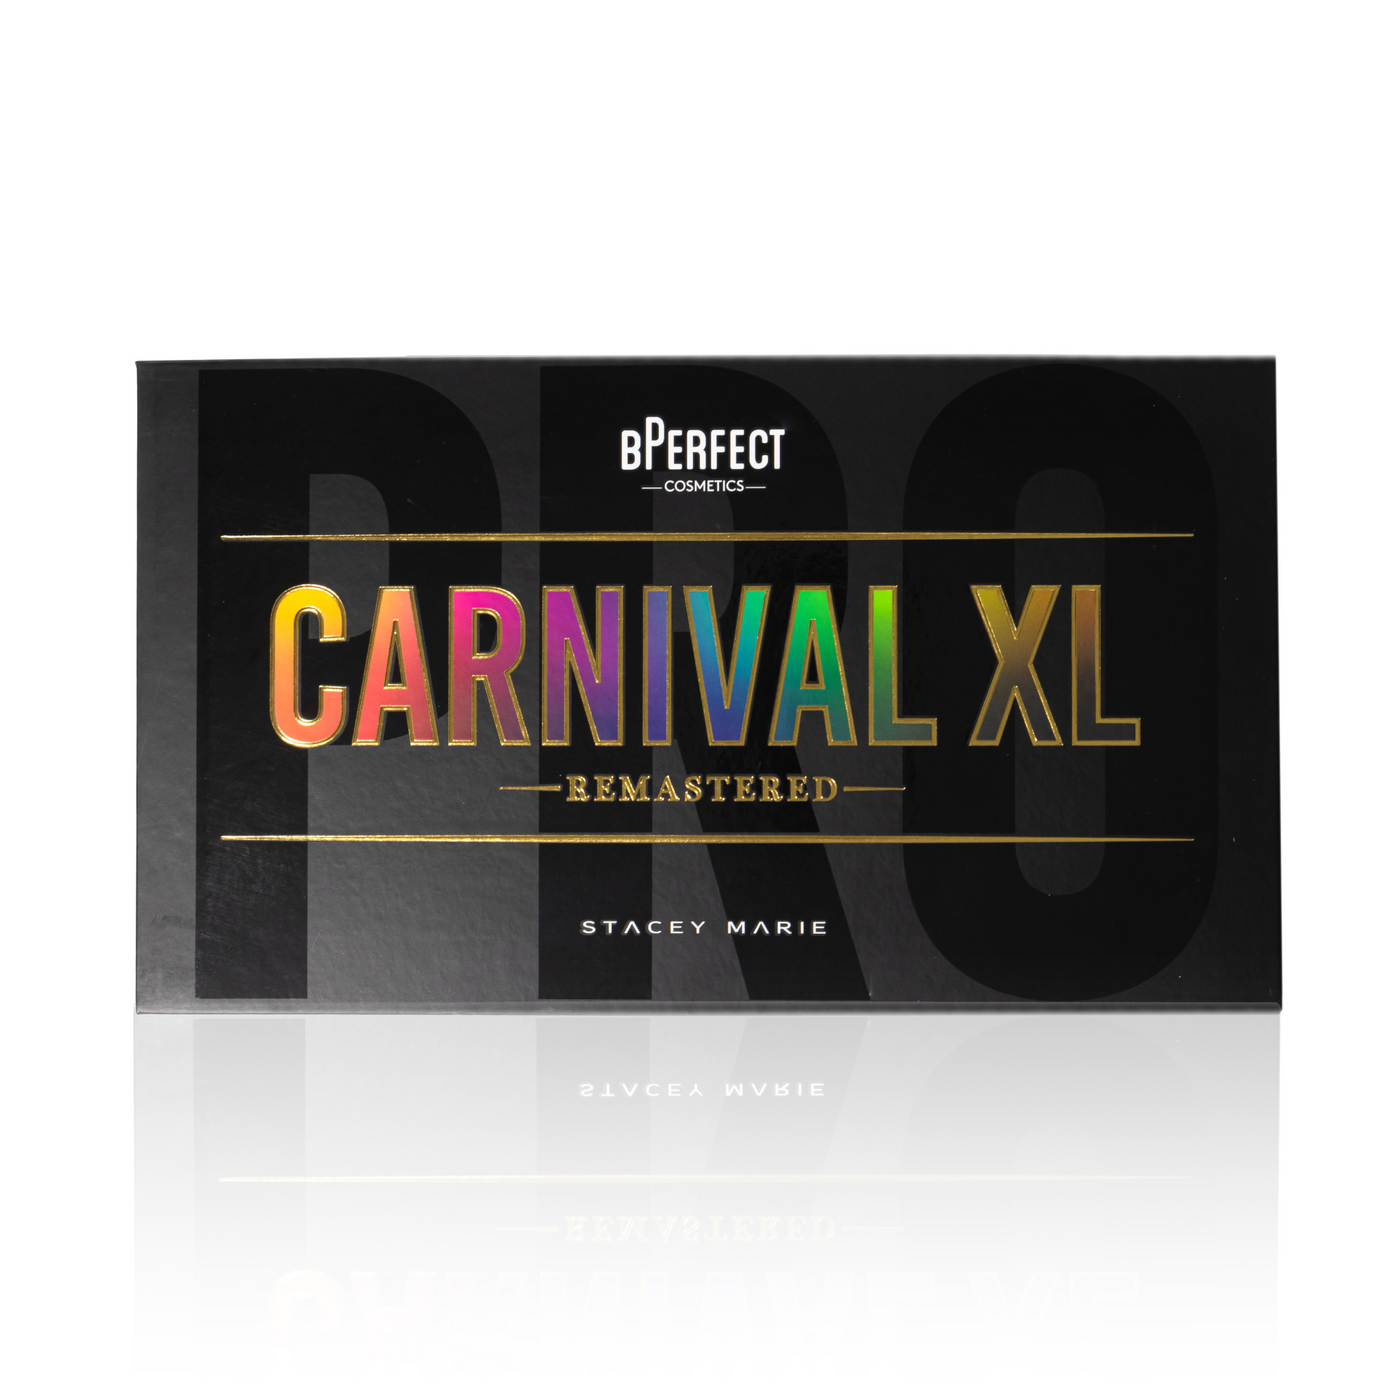 BPerfect x Stacey Marie - Carnival XL Pro - Remastered